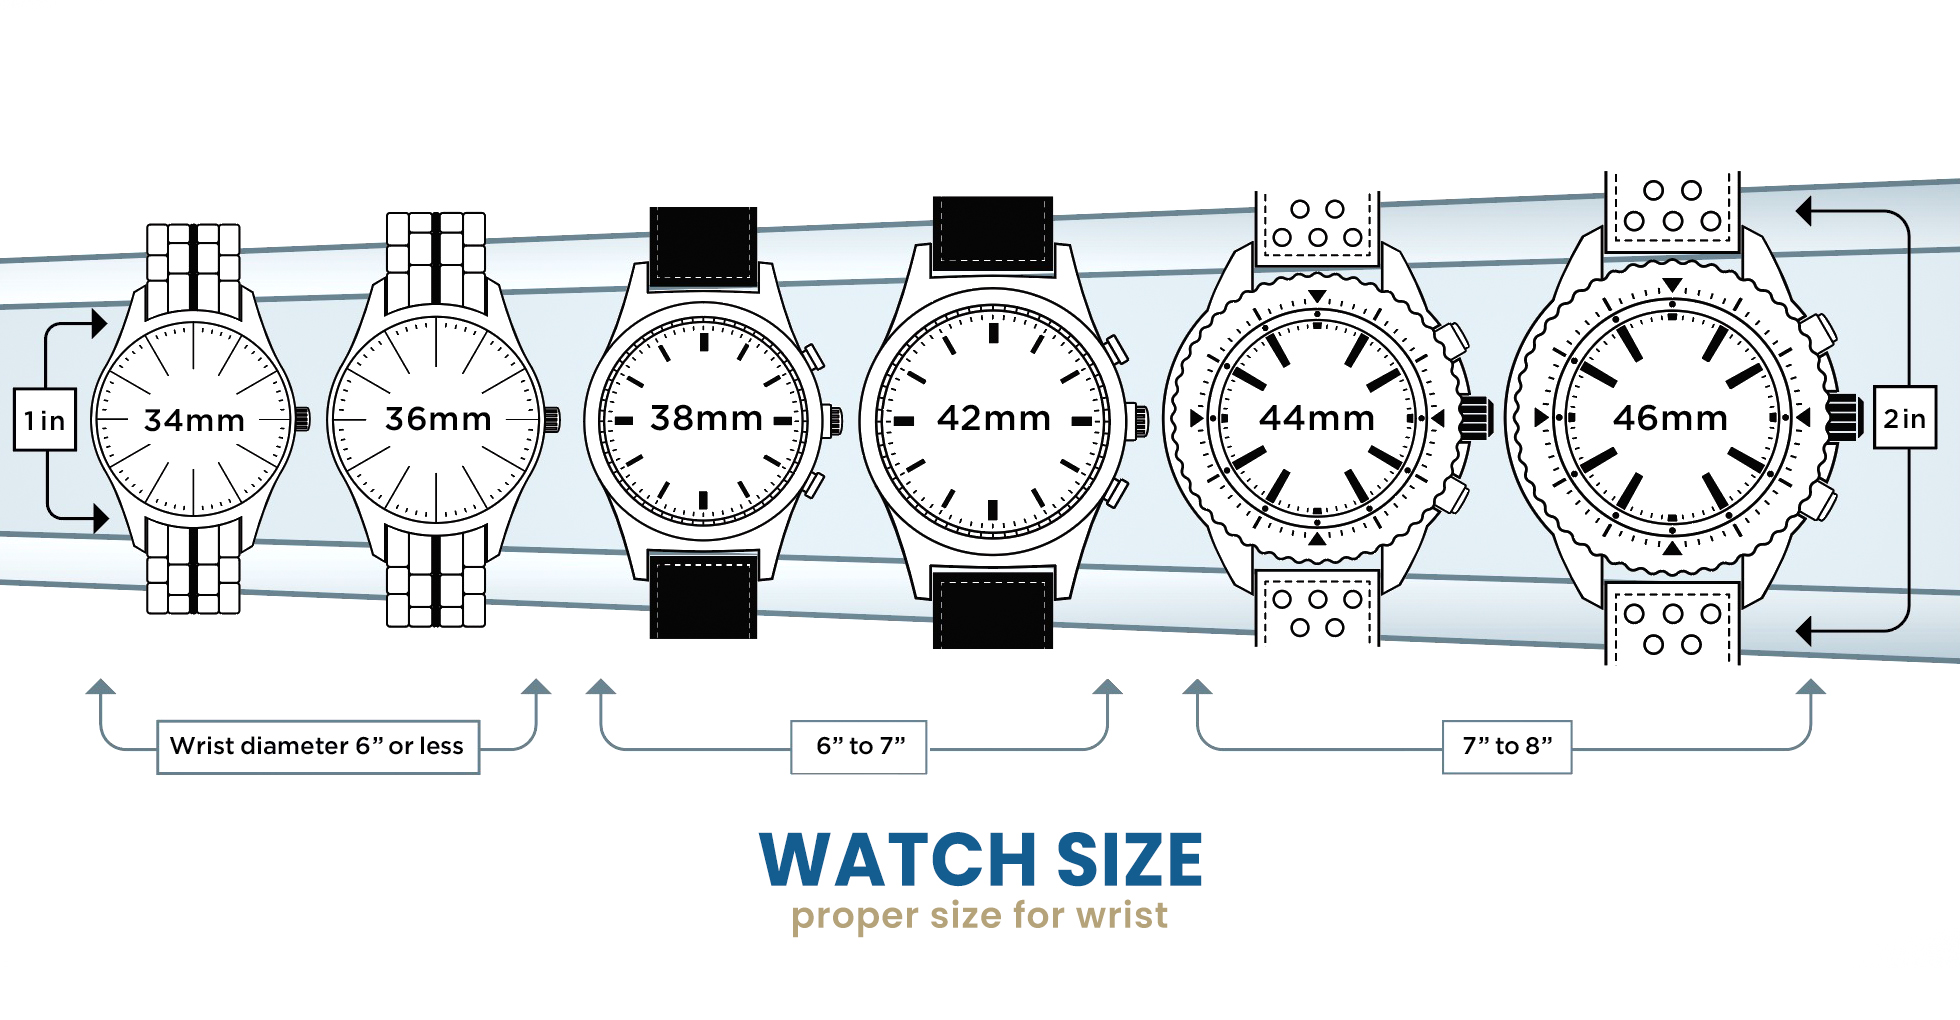 Watch size chart: how to choose the proper watch size for your wrist